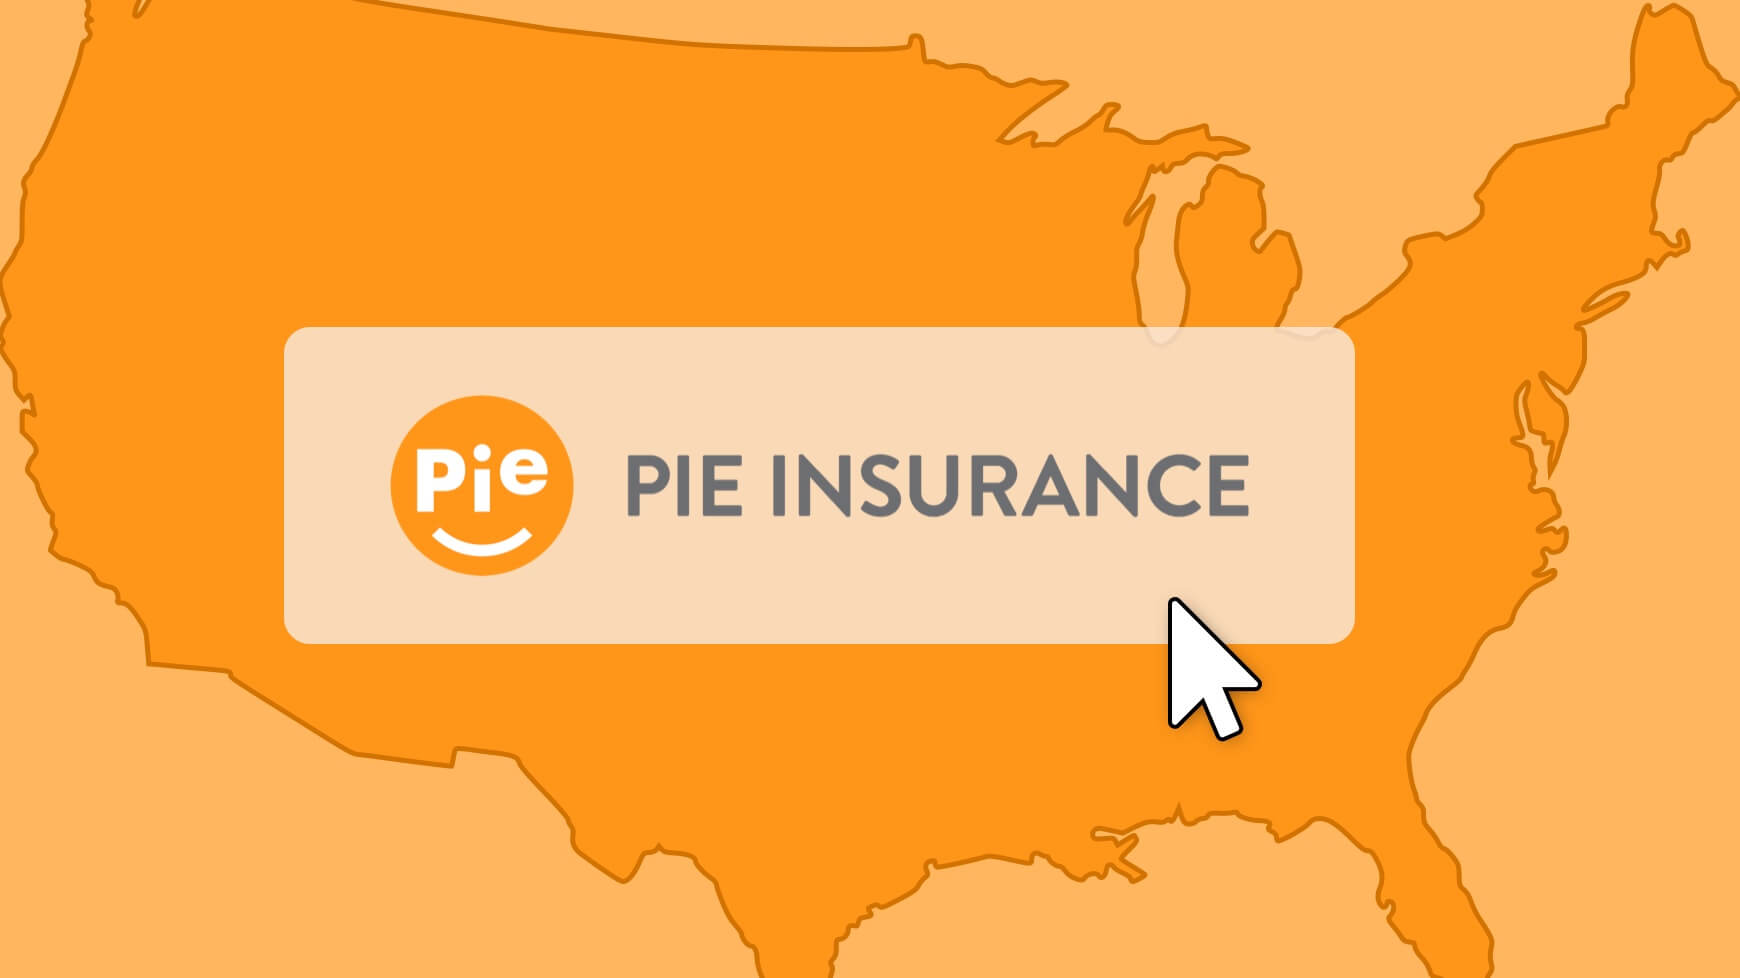 Pie Insurance Expands Online Workers’ Comp Coverage Into 4 Additional States